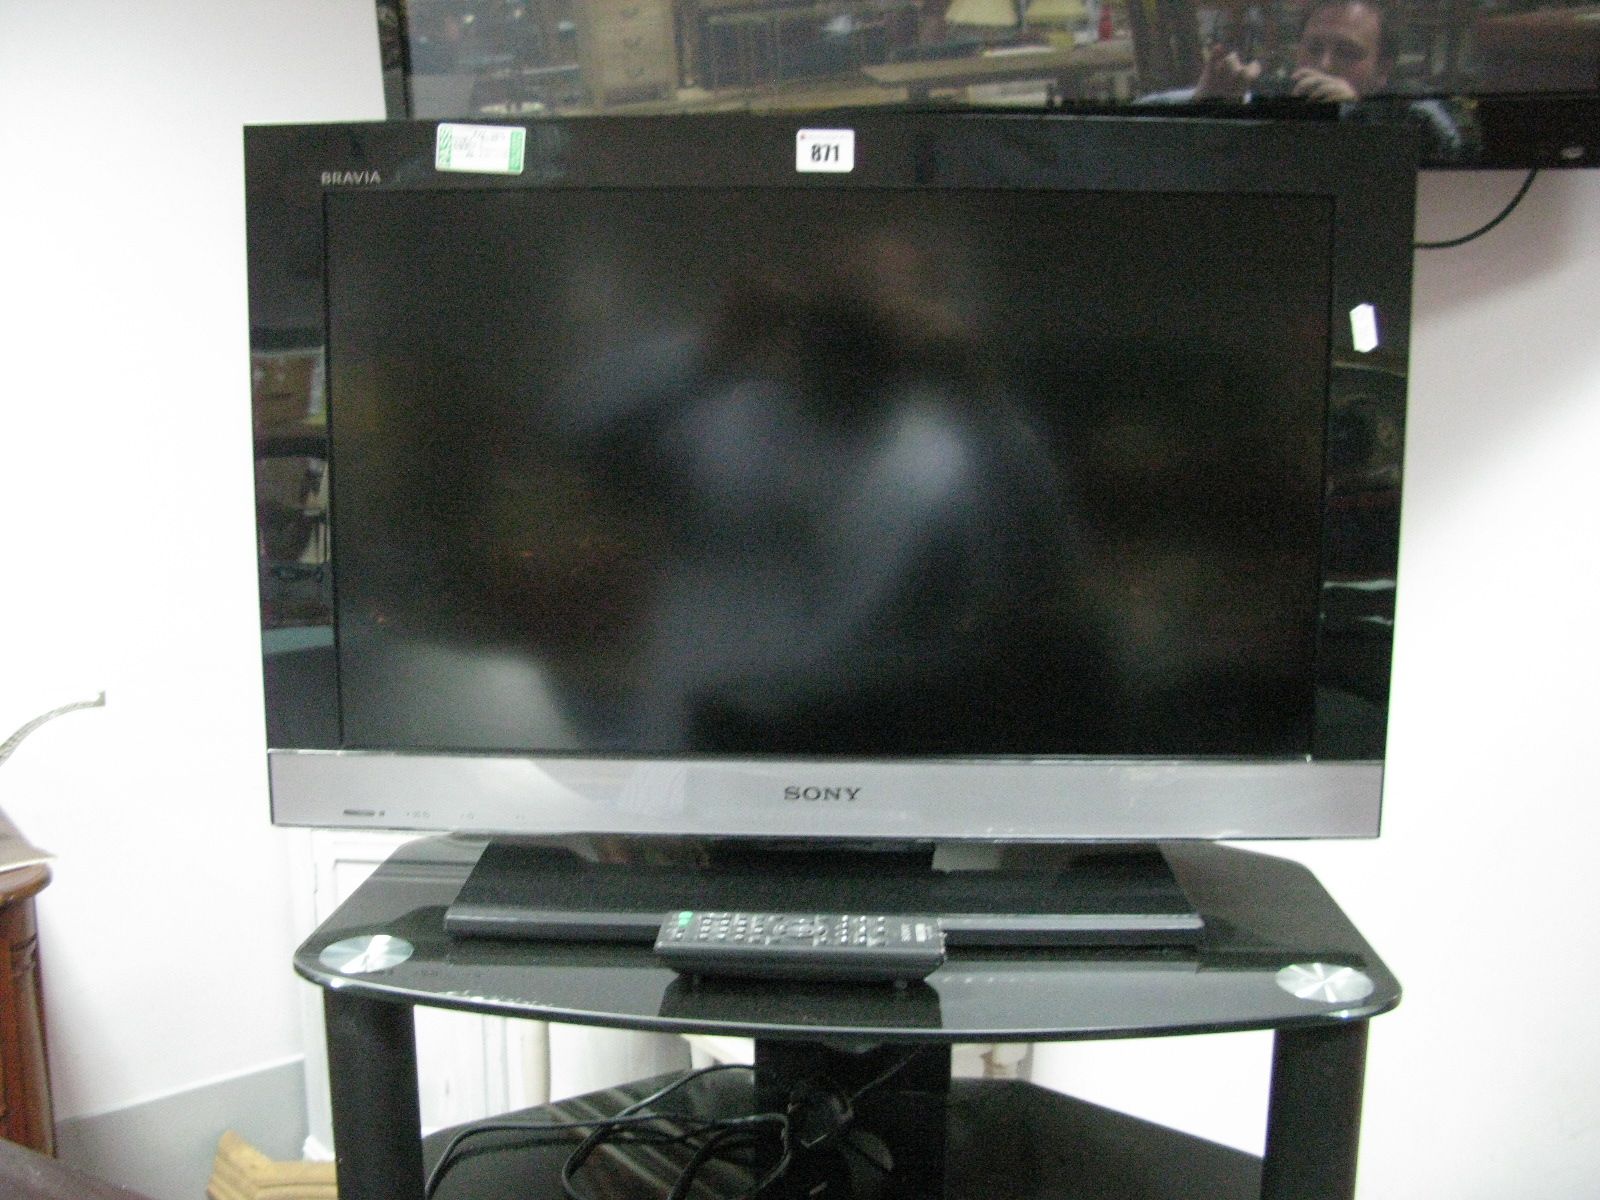 A Sony Bravia 26" TV, with remote and stand.